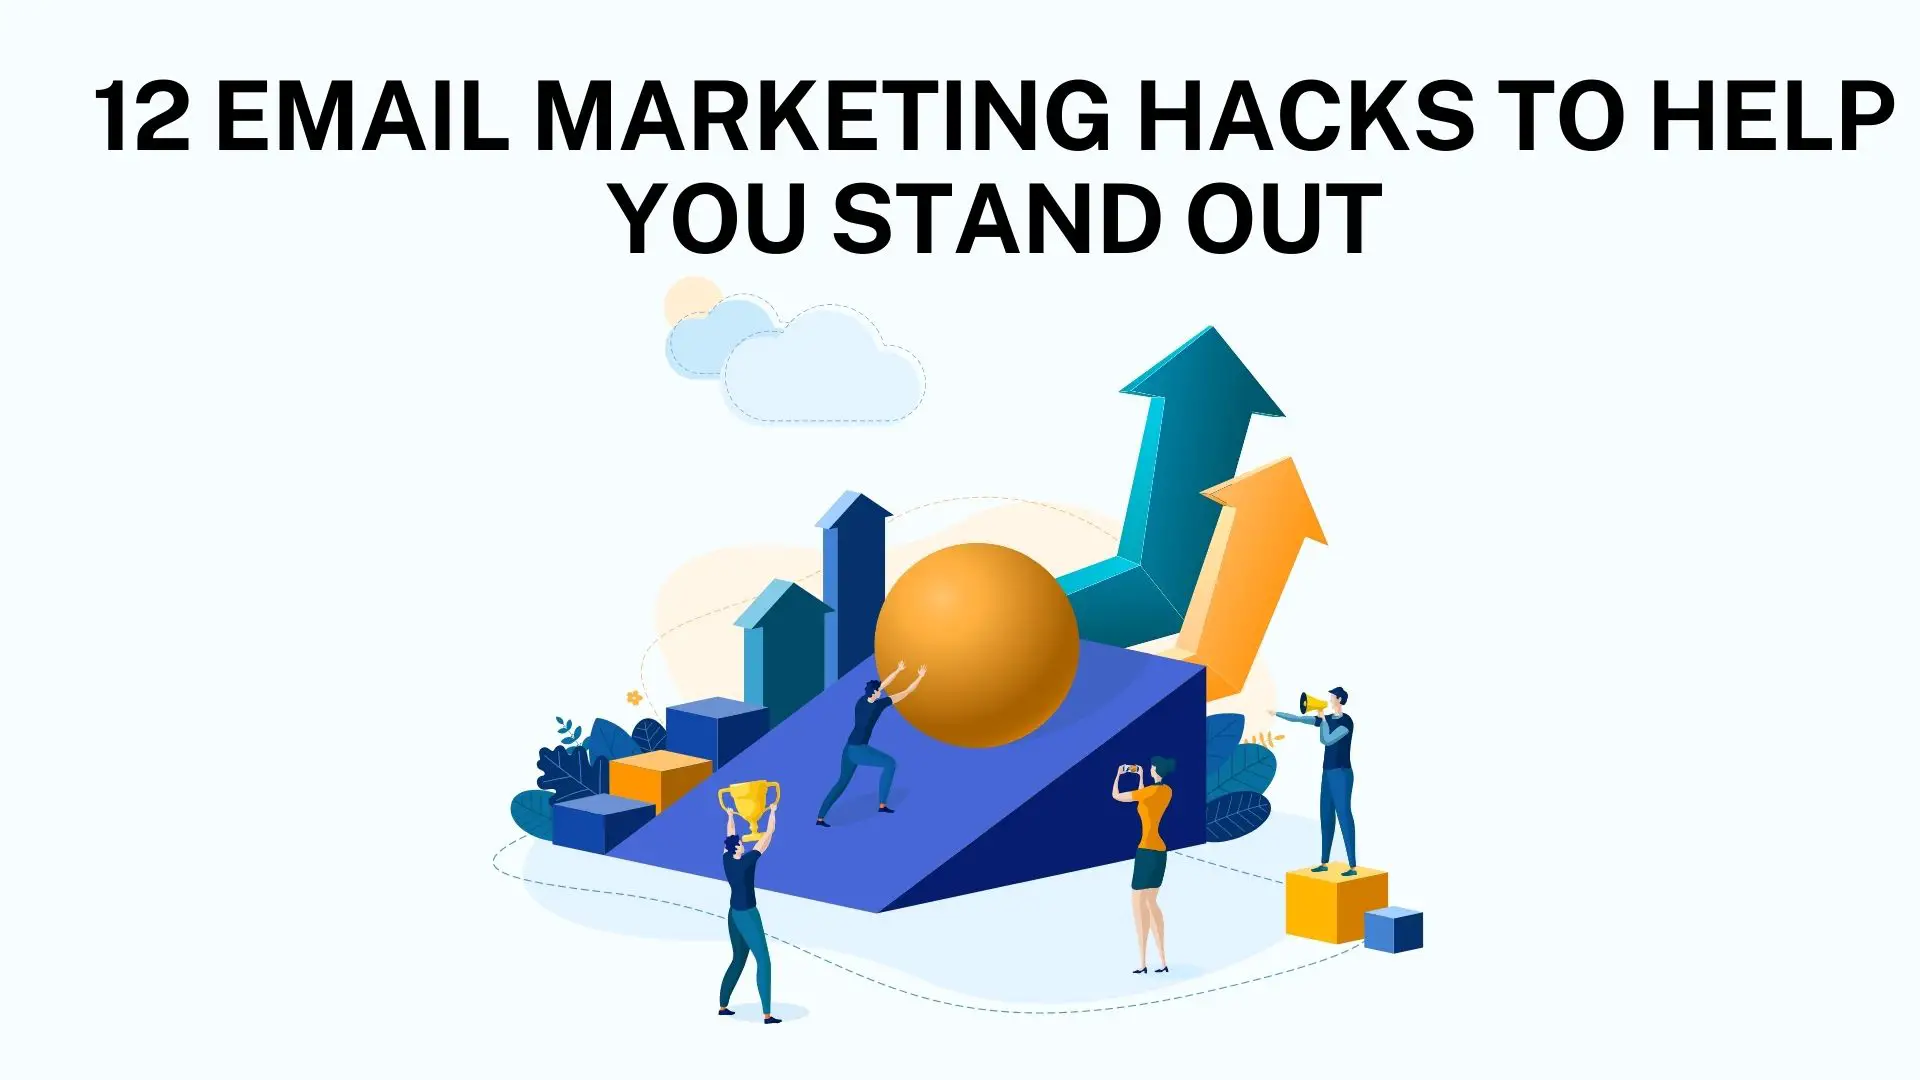 12 Email Marketing Hacks To Help You Stand Out